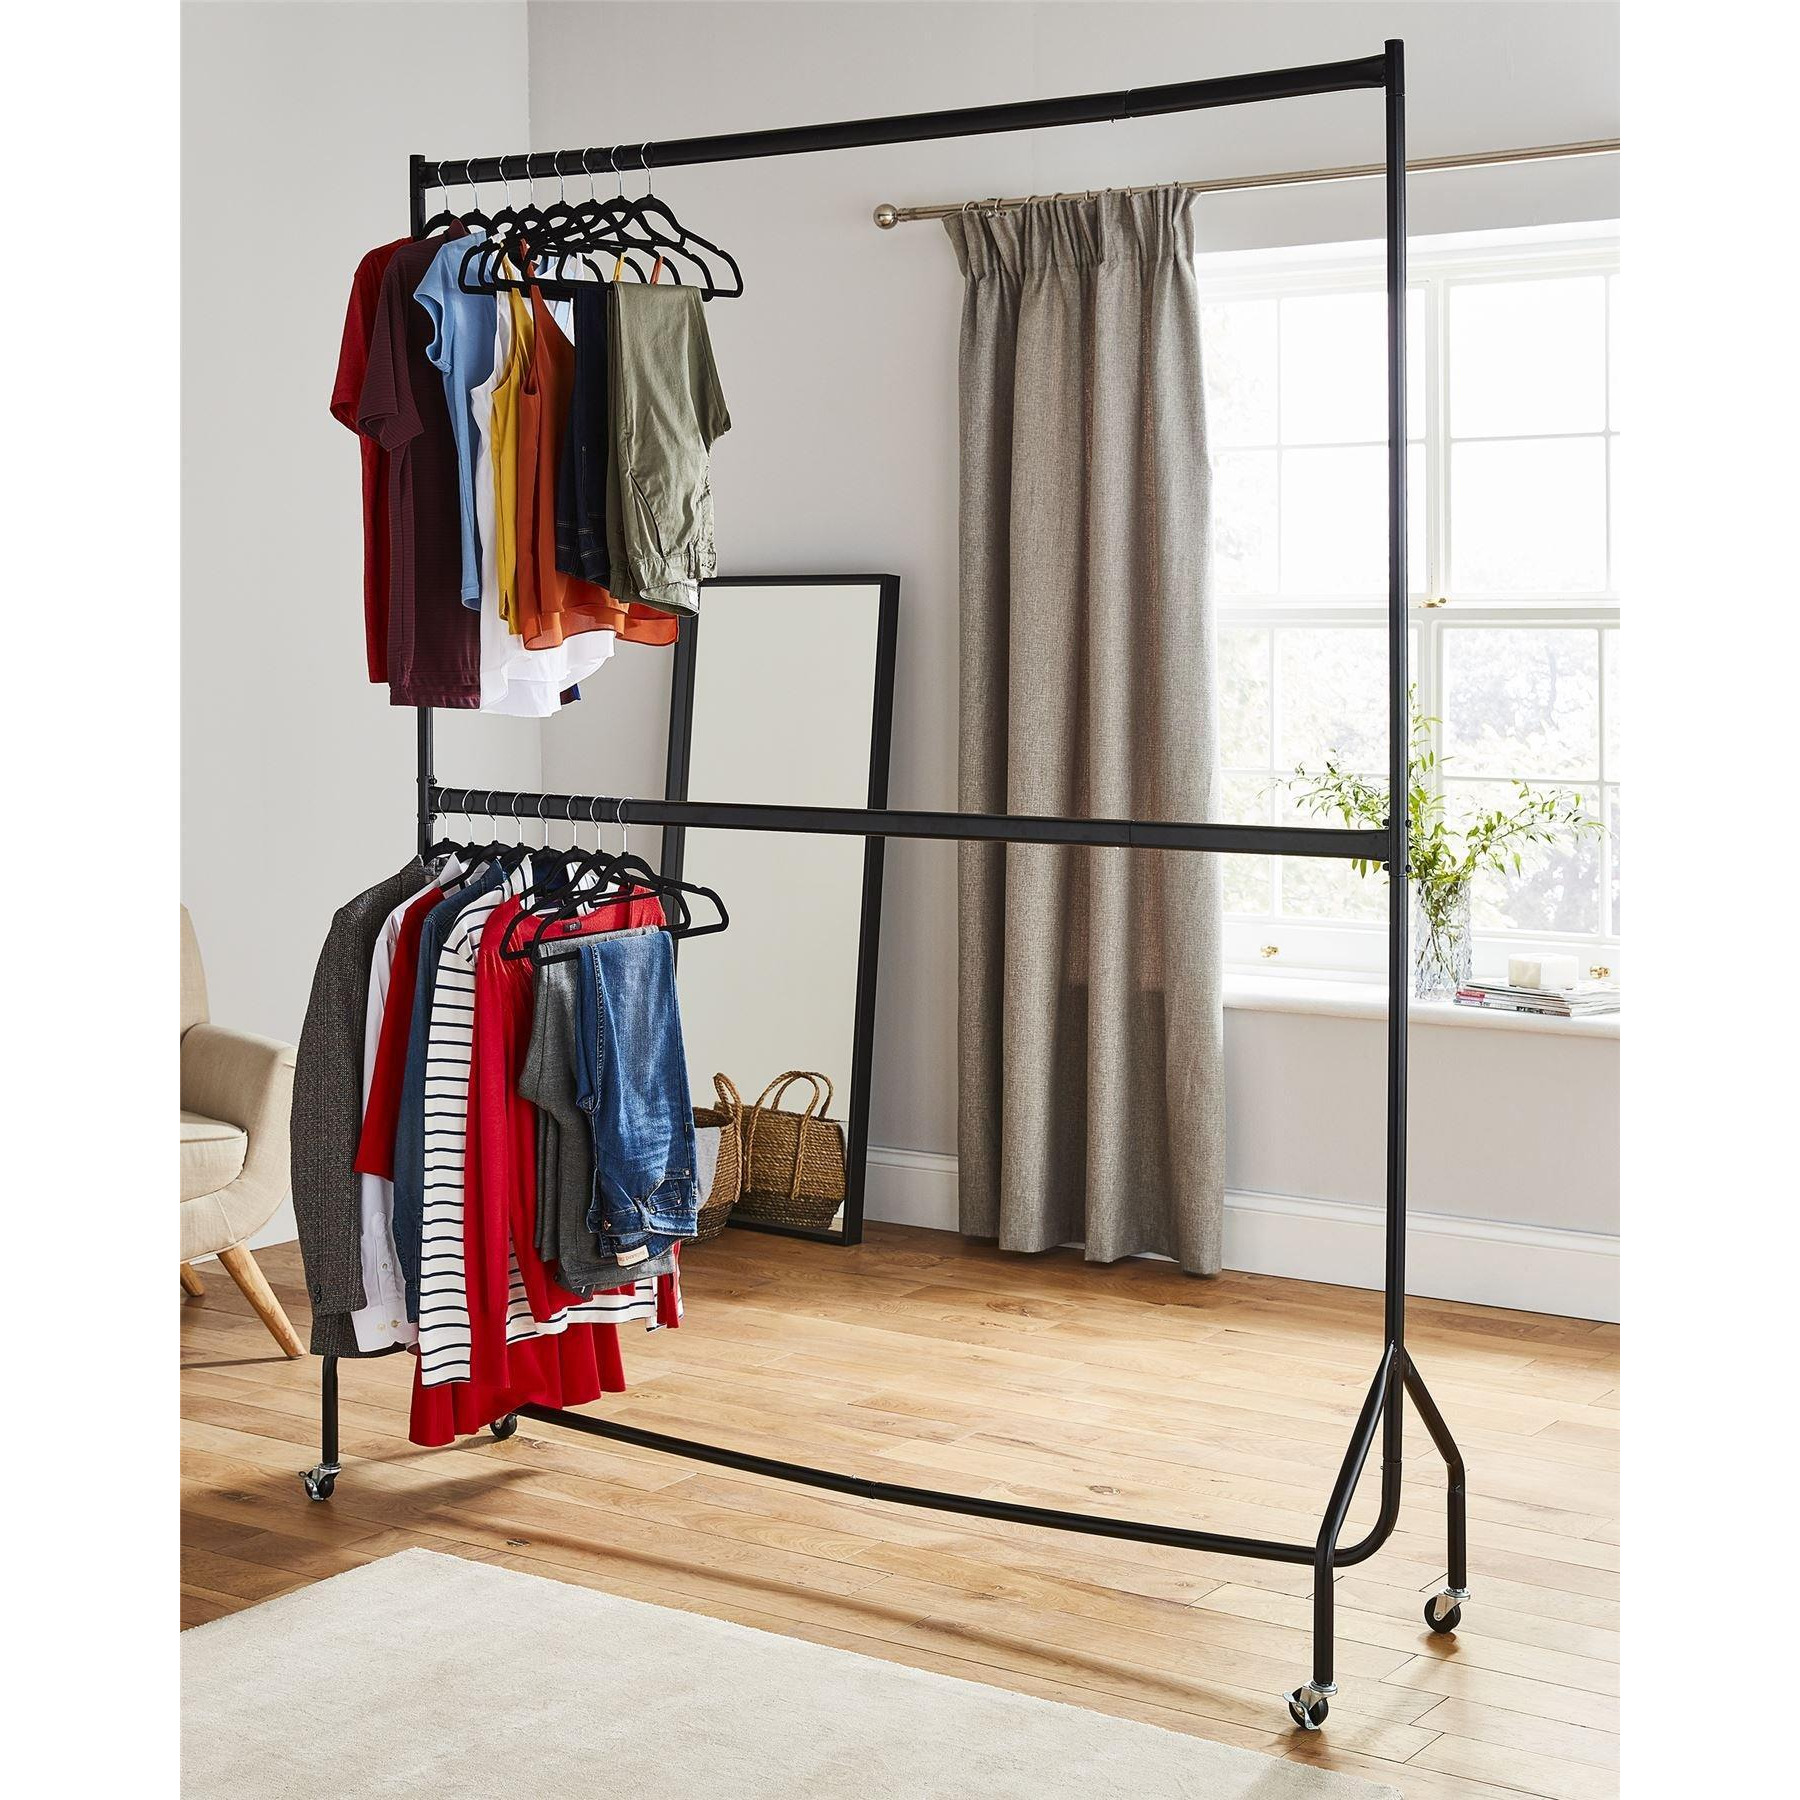 6ft long x 7ft Two Tier Heavy Duty Clothes Rail Garment Hanging Rack In Black - image 1